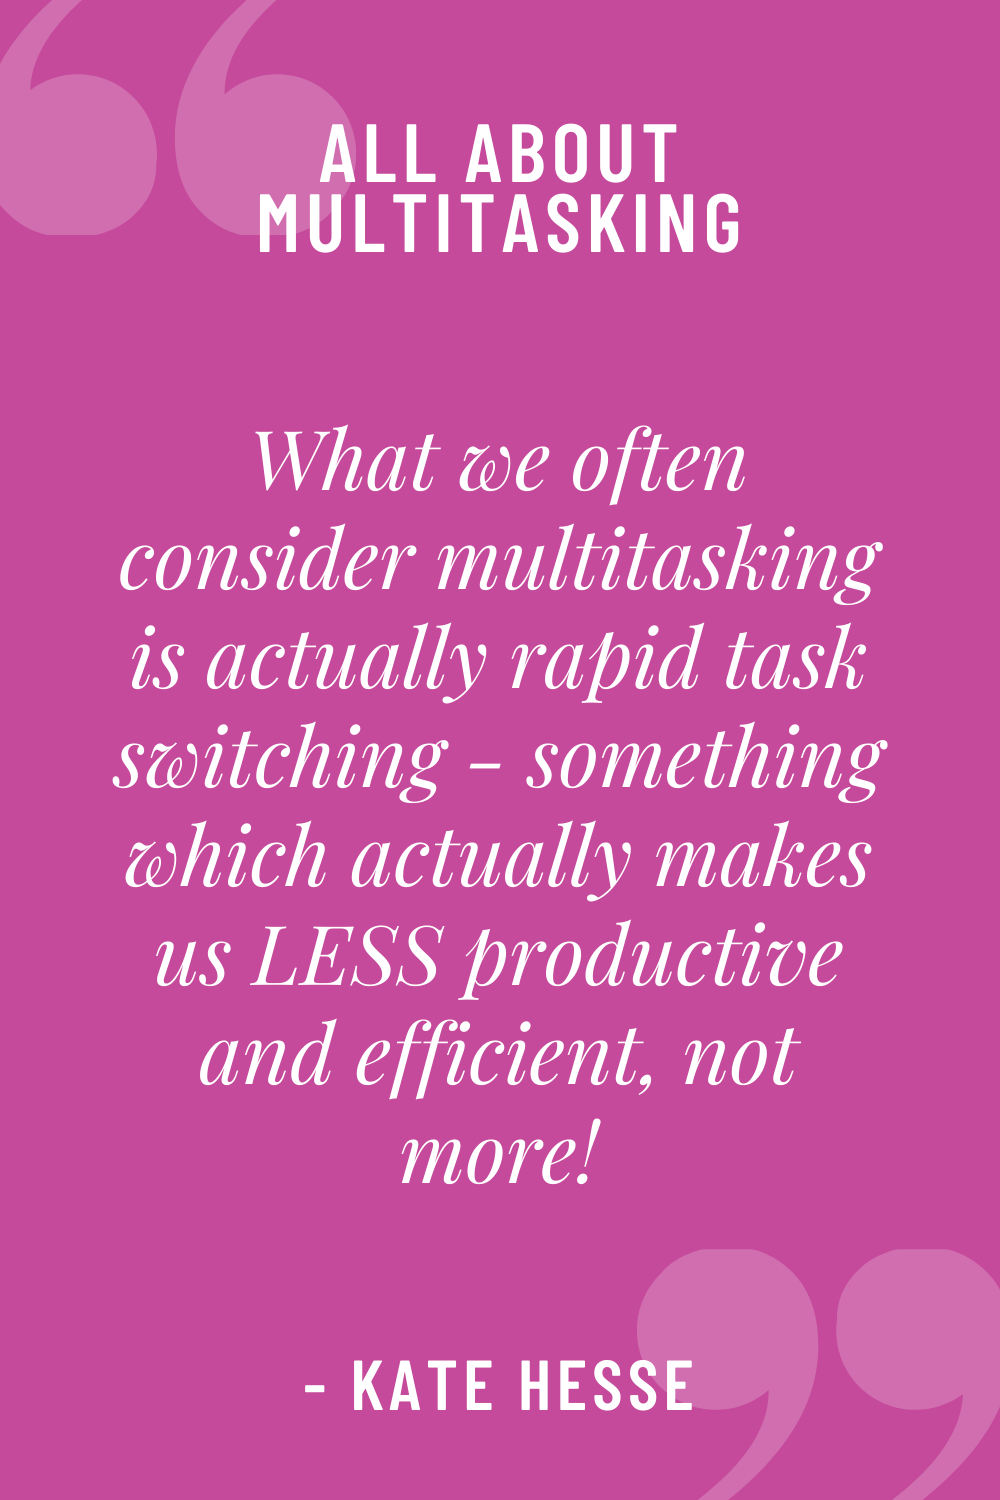 What we often consider multitasking is actually rapid task switching - something which actually makes us LESS productive and efficient, not more!